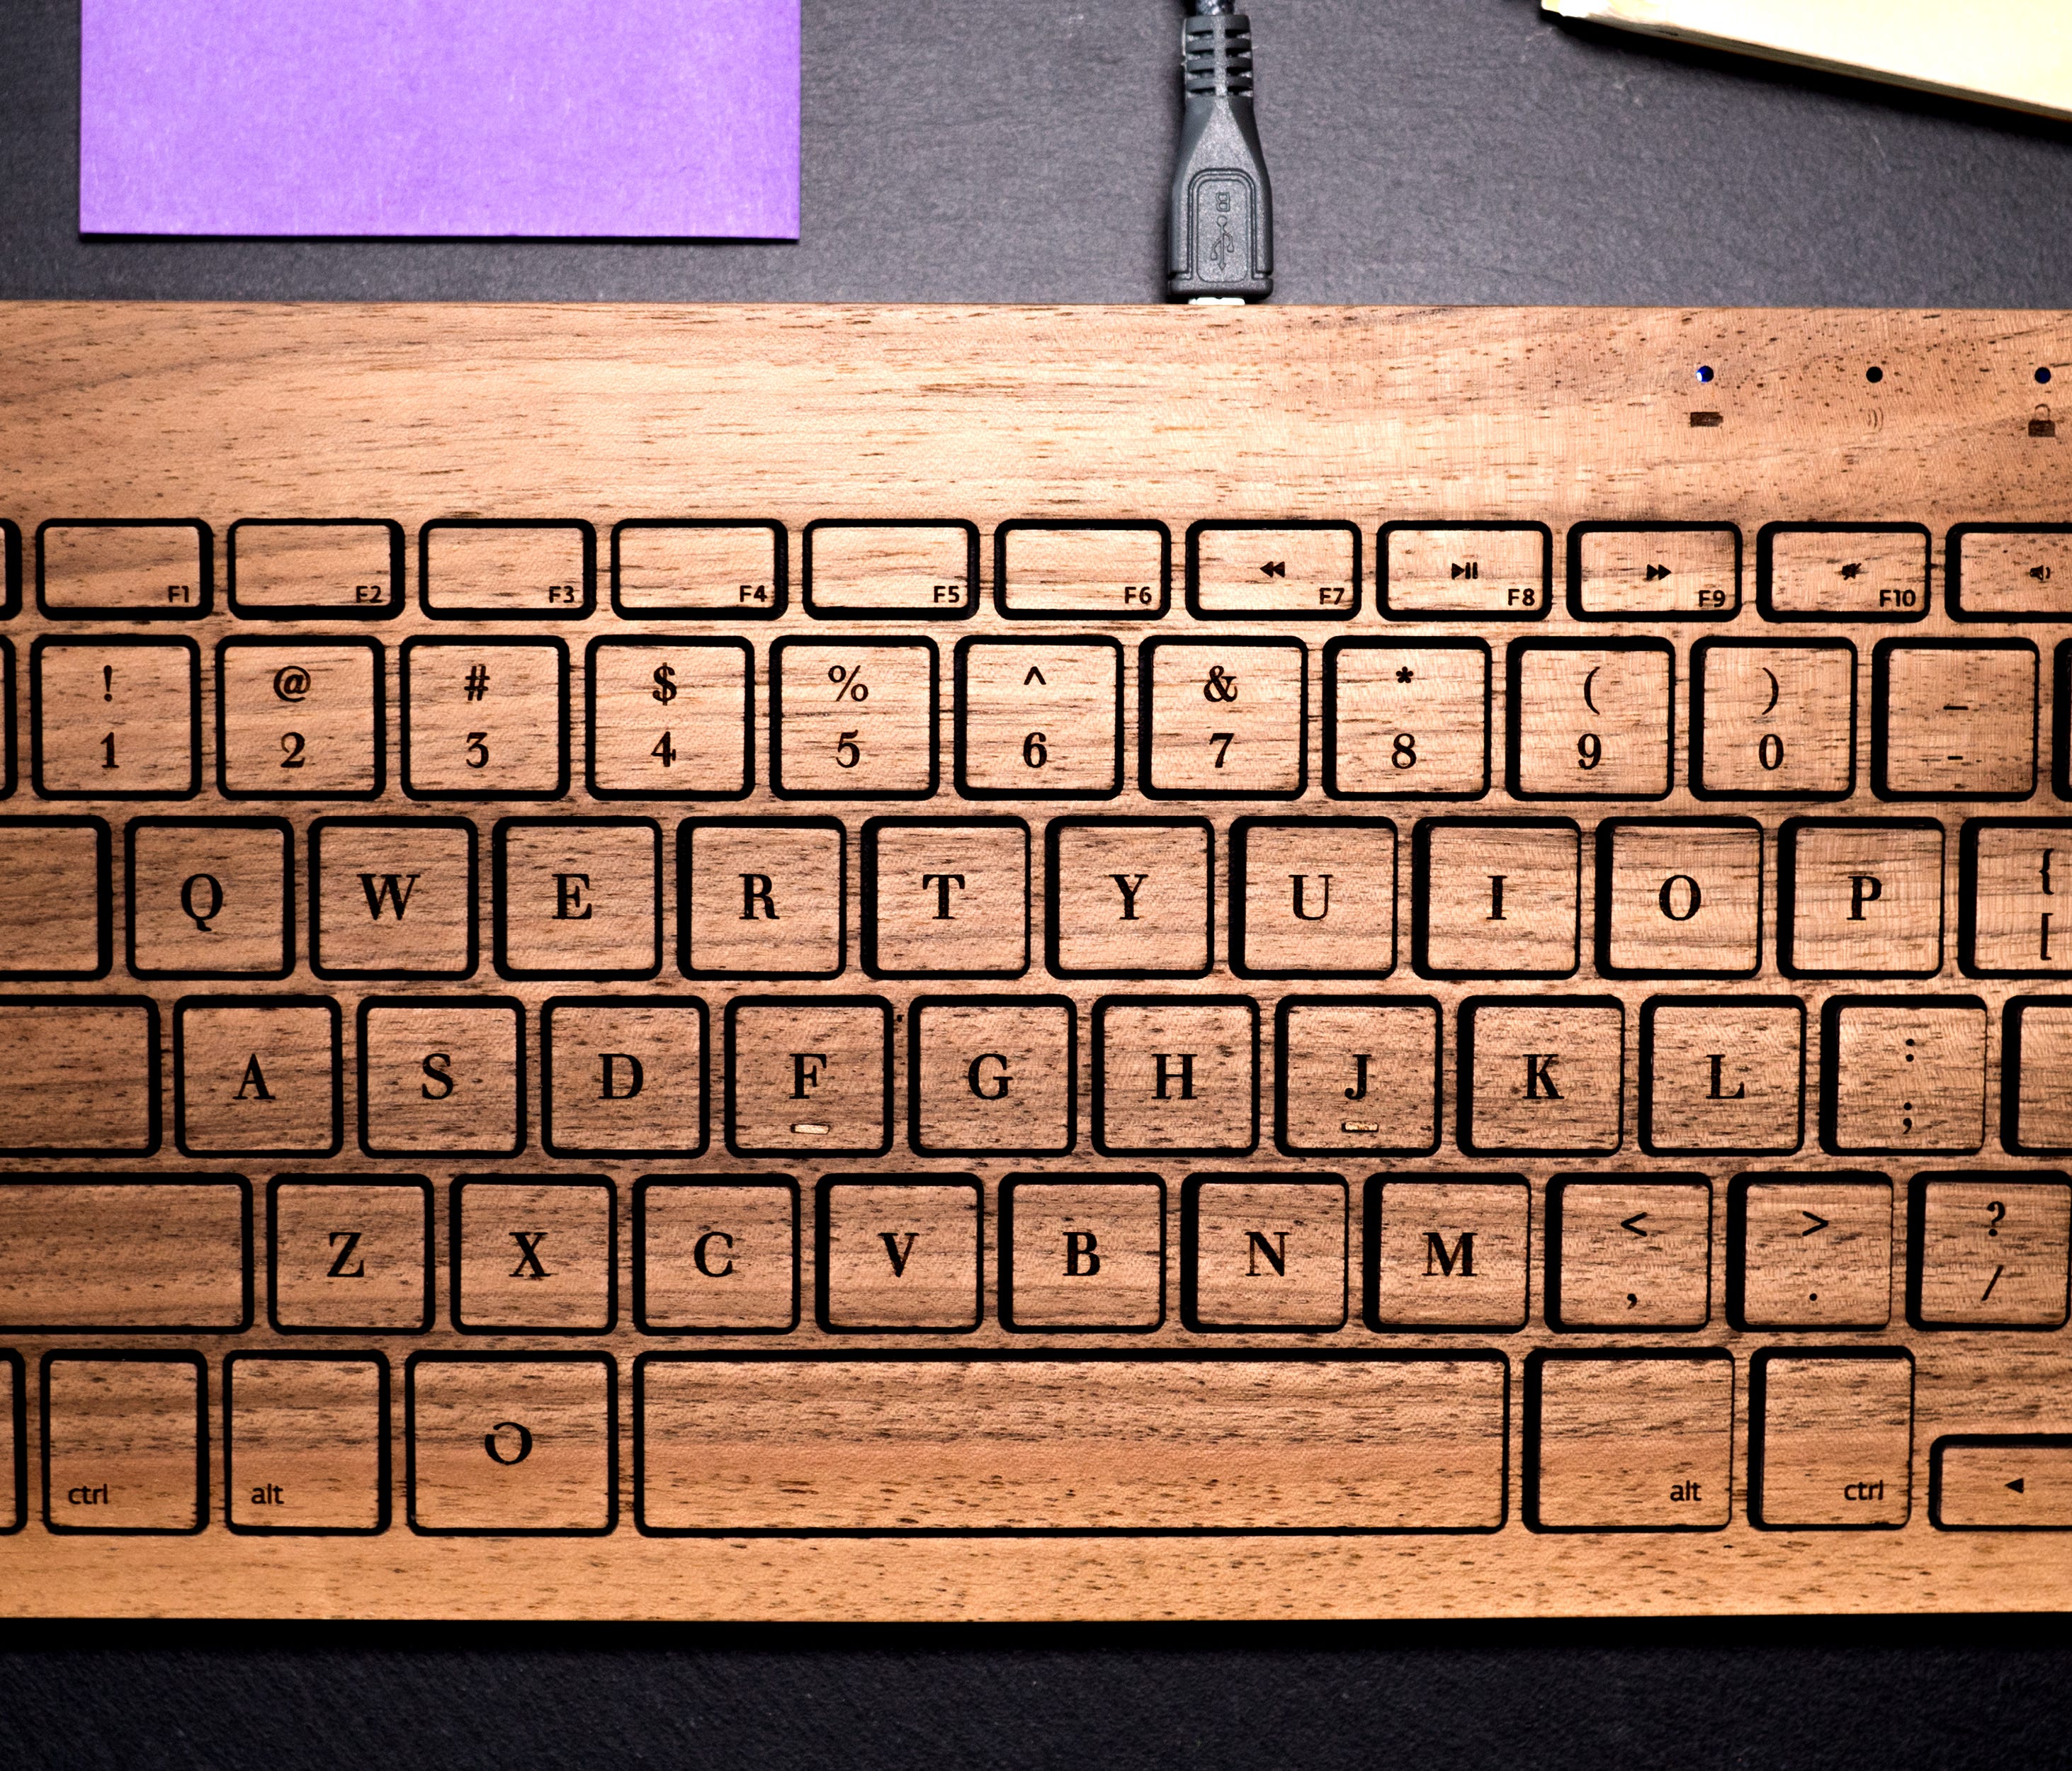 This gorgeous keyboard will instantly transform your workspace.